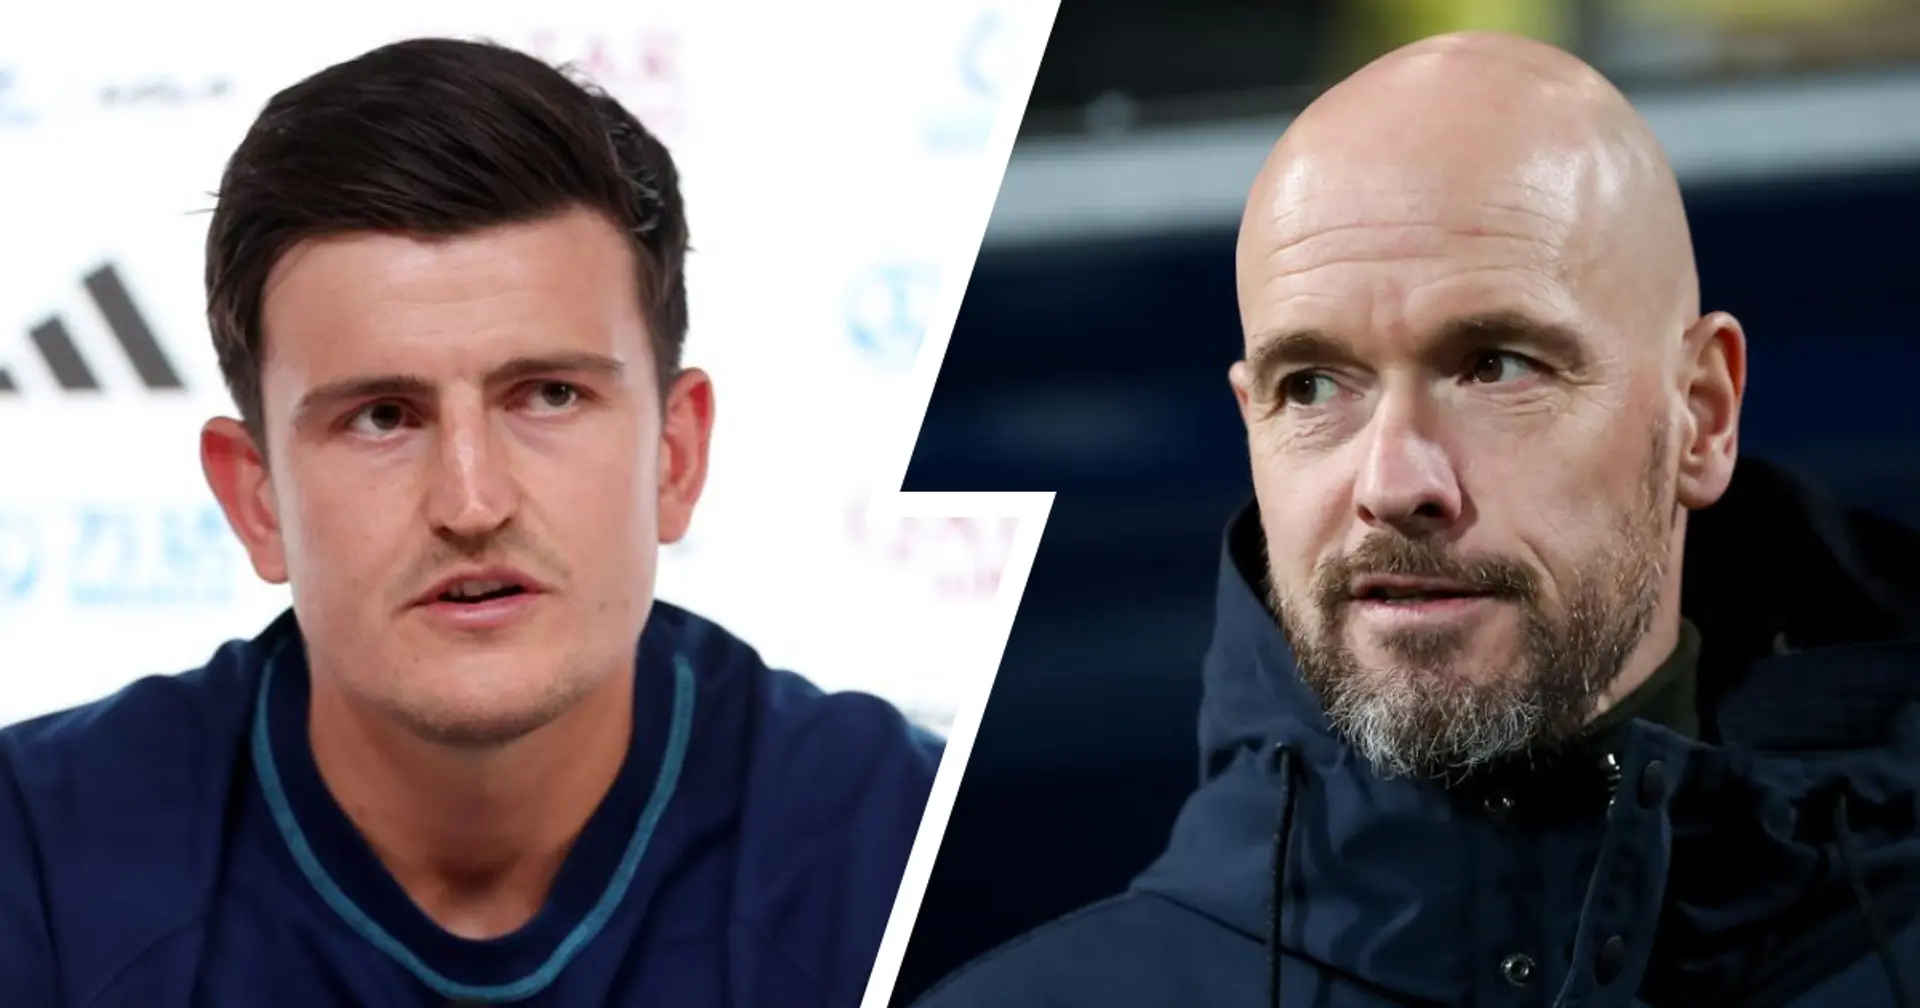 'I want to be playing every week for my club': Harry Maguire sends message to Ten Hag